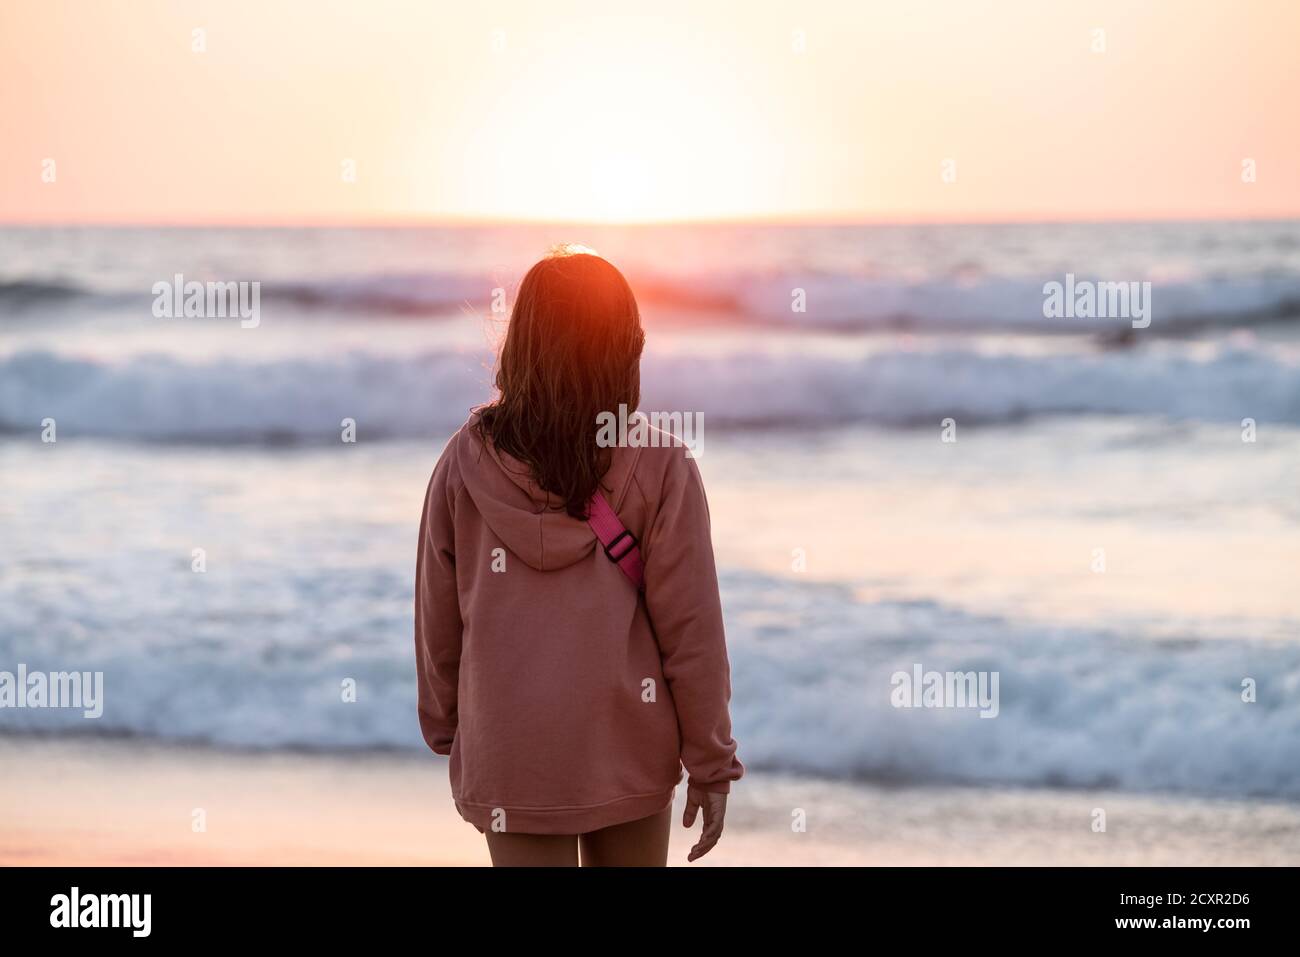 portrait girl in pink sweatshirt looking at the sea with a isolate ...